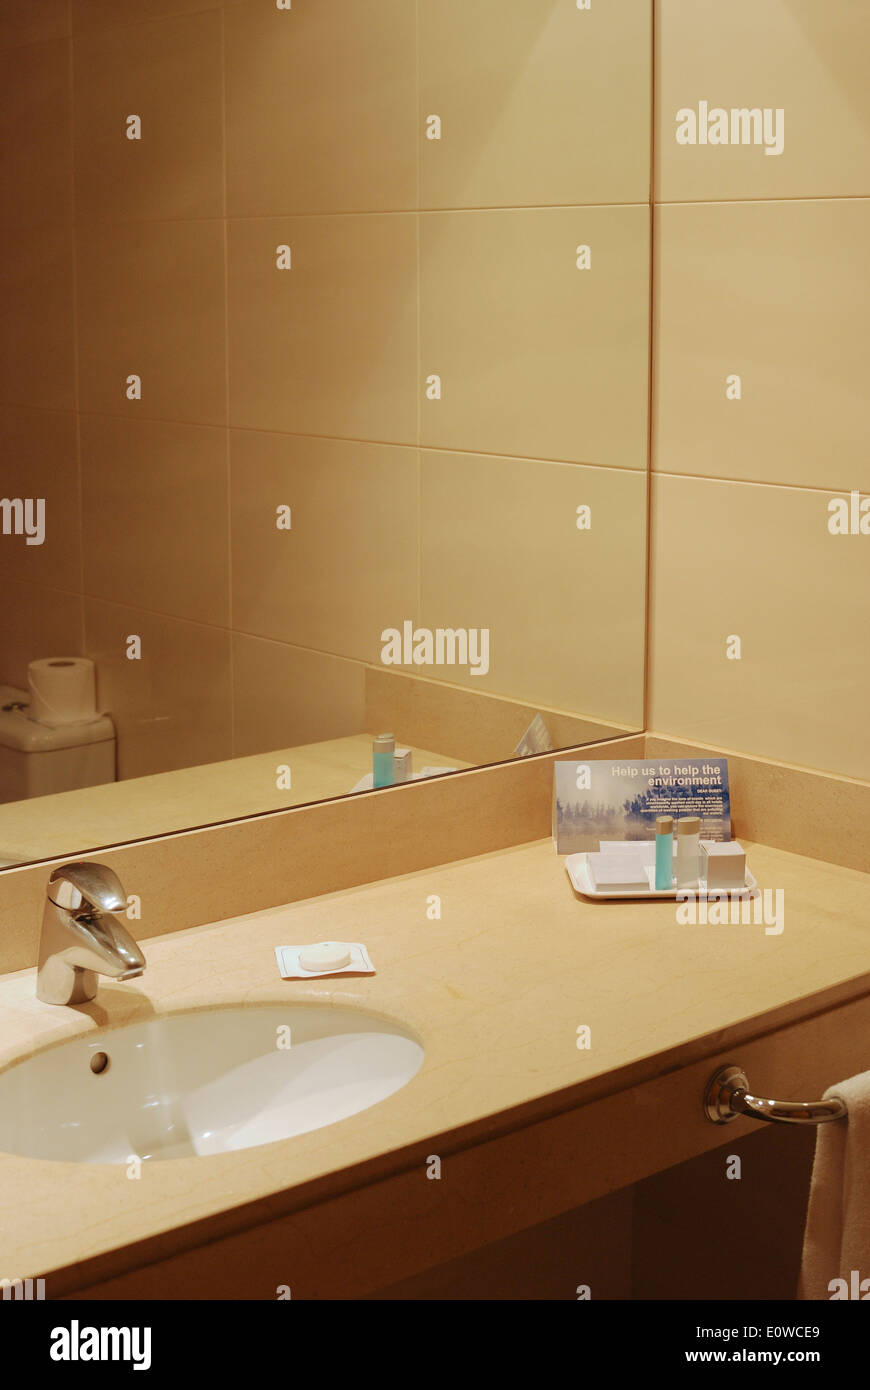 Modern hotel bathroom showing sink and mirror with environmental message about towel washing Stock Photo